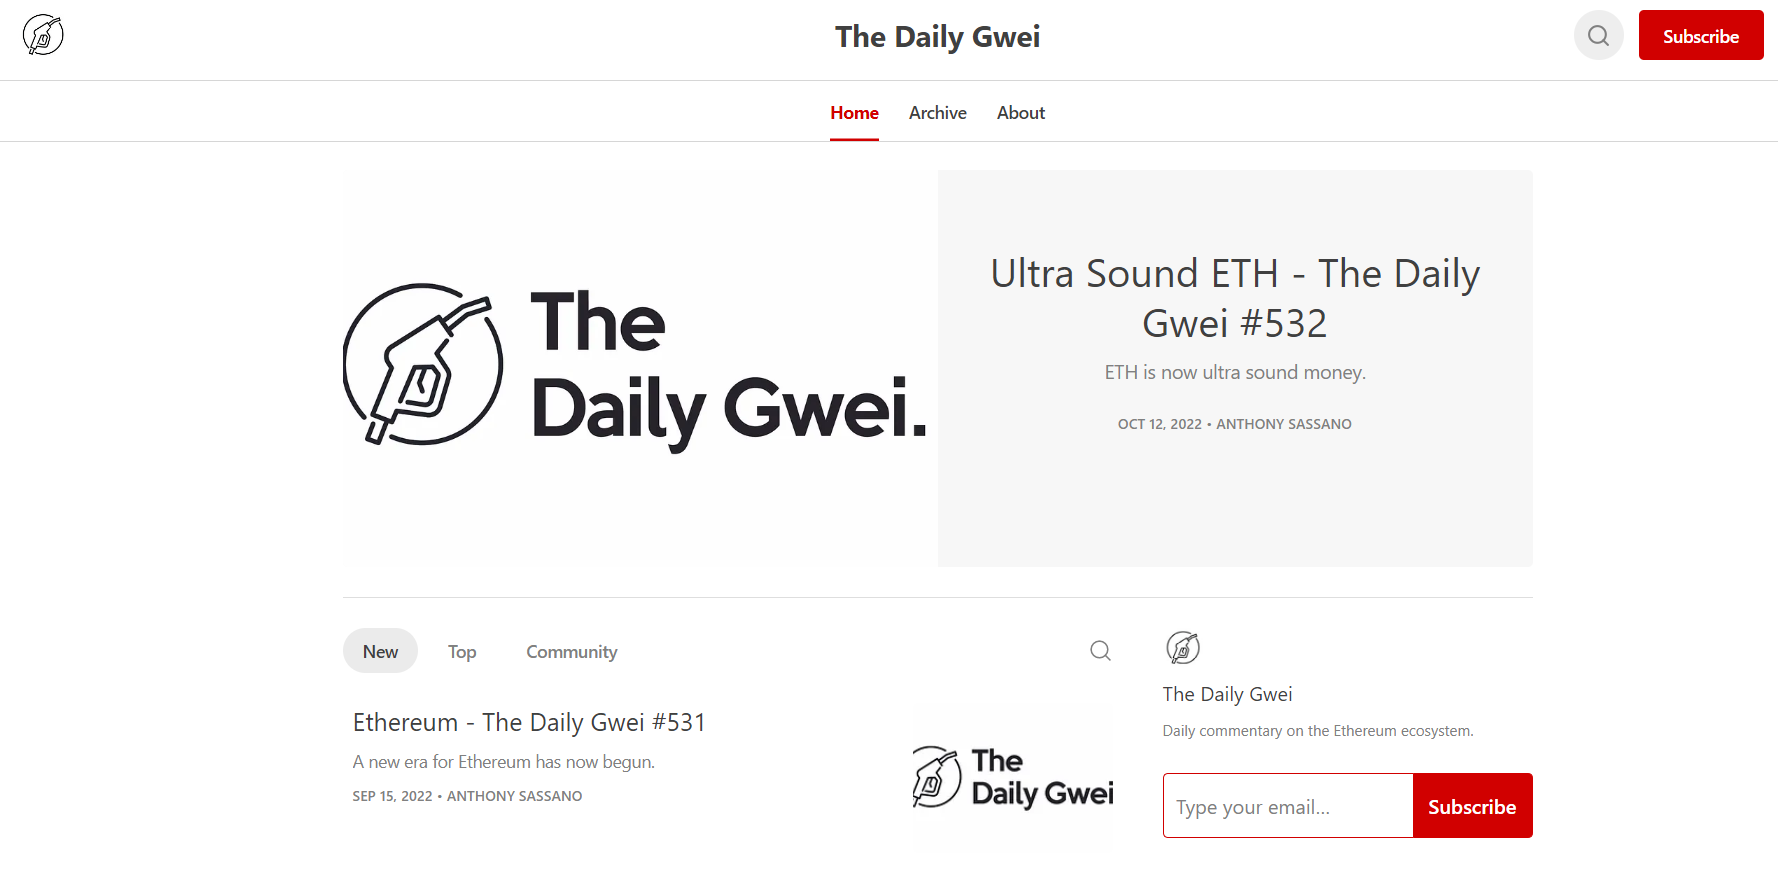 The Daily Gwei